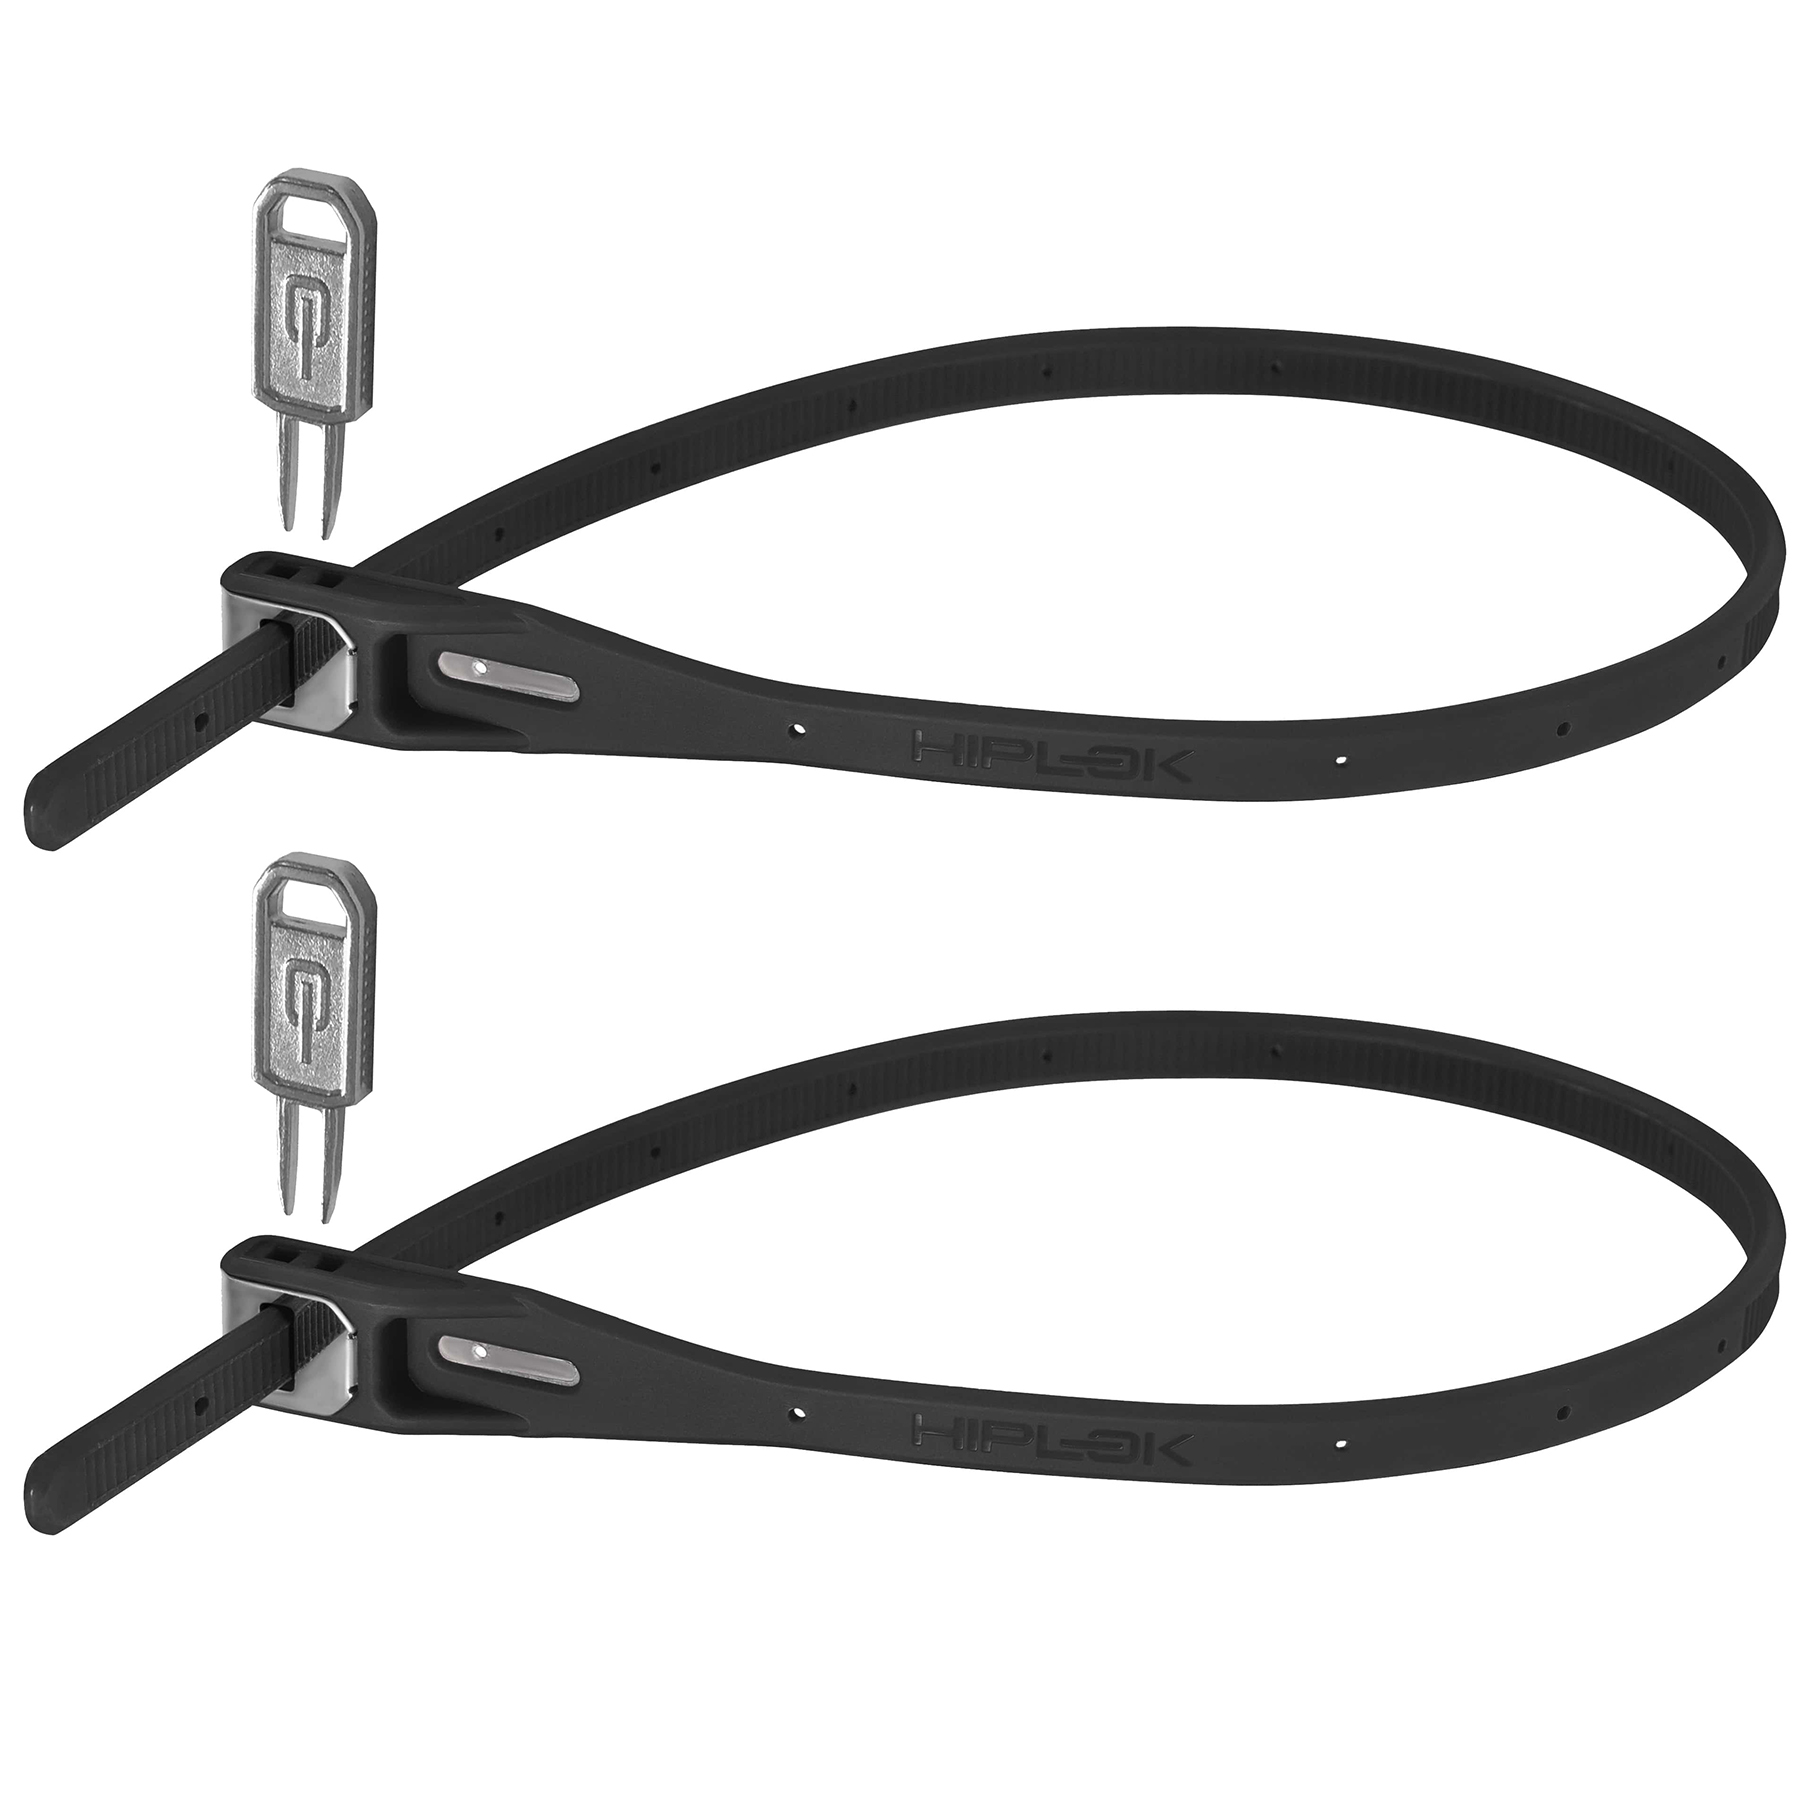 Image of Hiplok Z-Lok Cable Lock - 2 pieces - all black